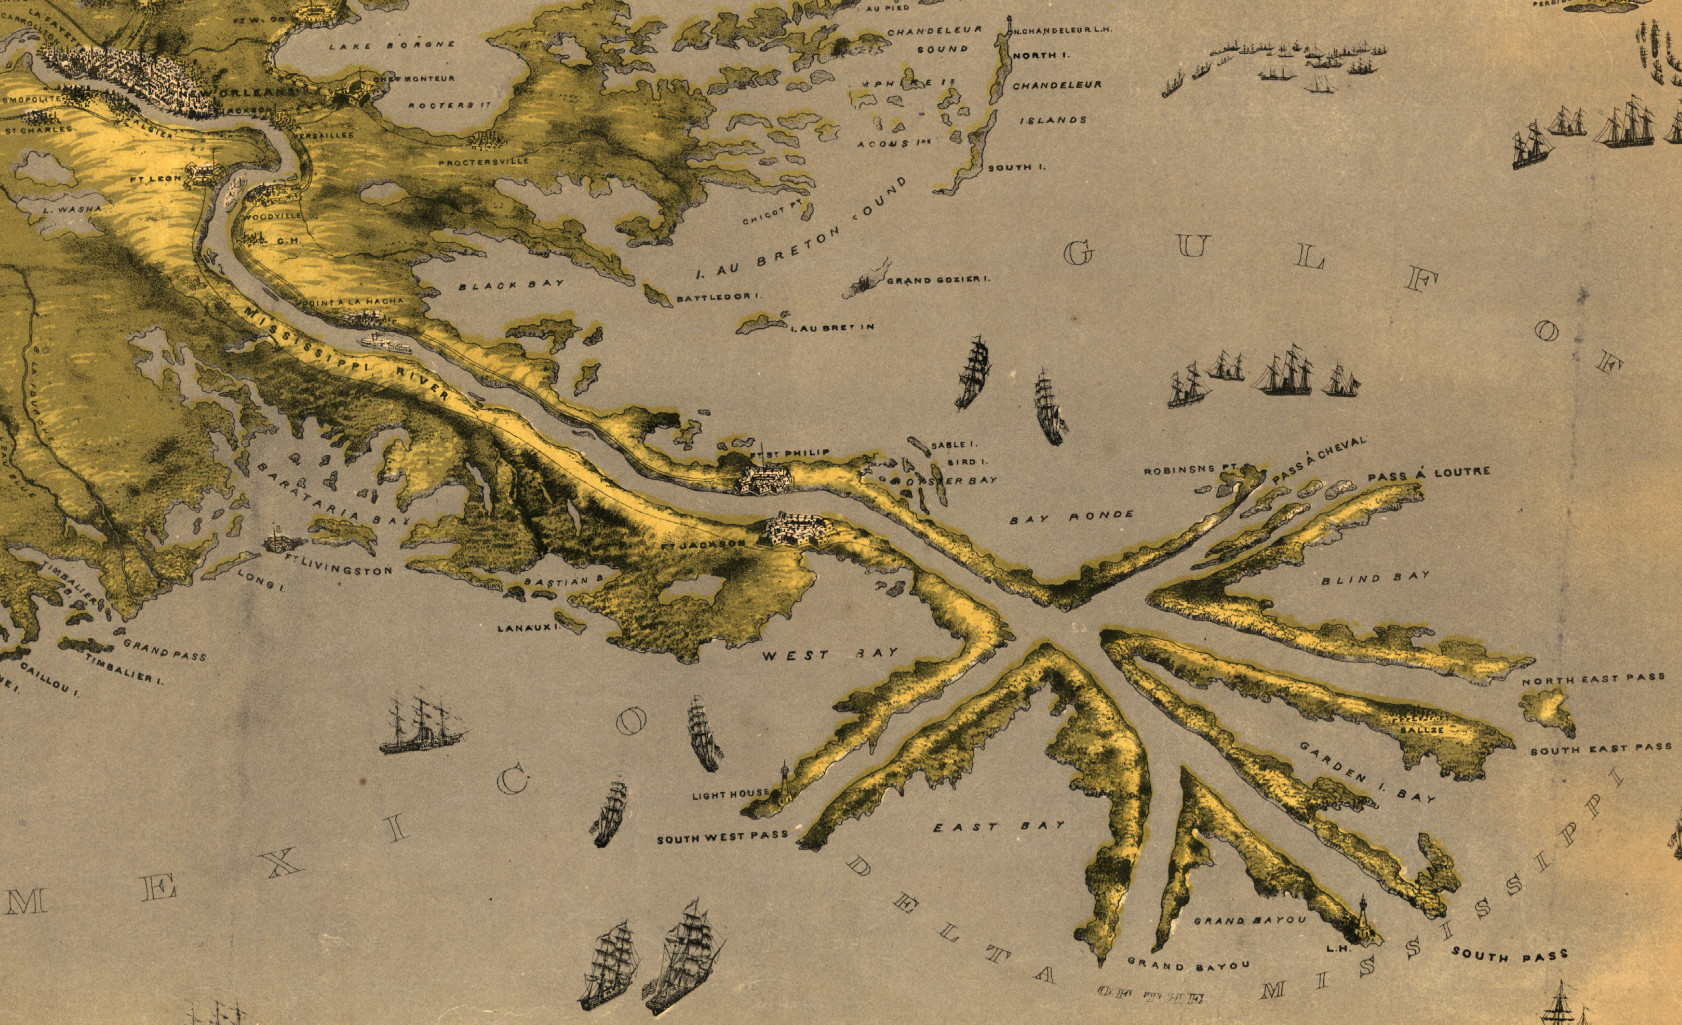 Pictorial map view of the Mississippi River Delta and locations of New Orleans, Fort Jackson, Fort St. Philip, and the Head of Passes.